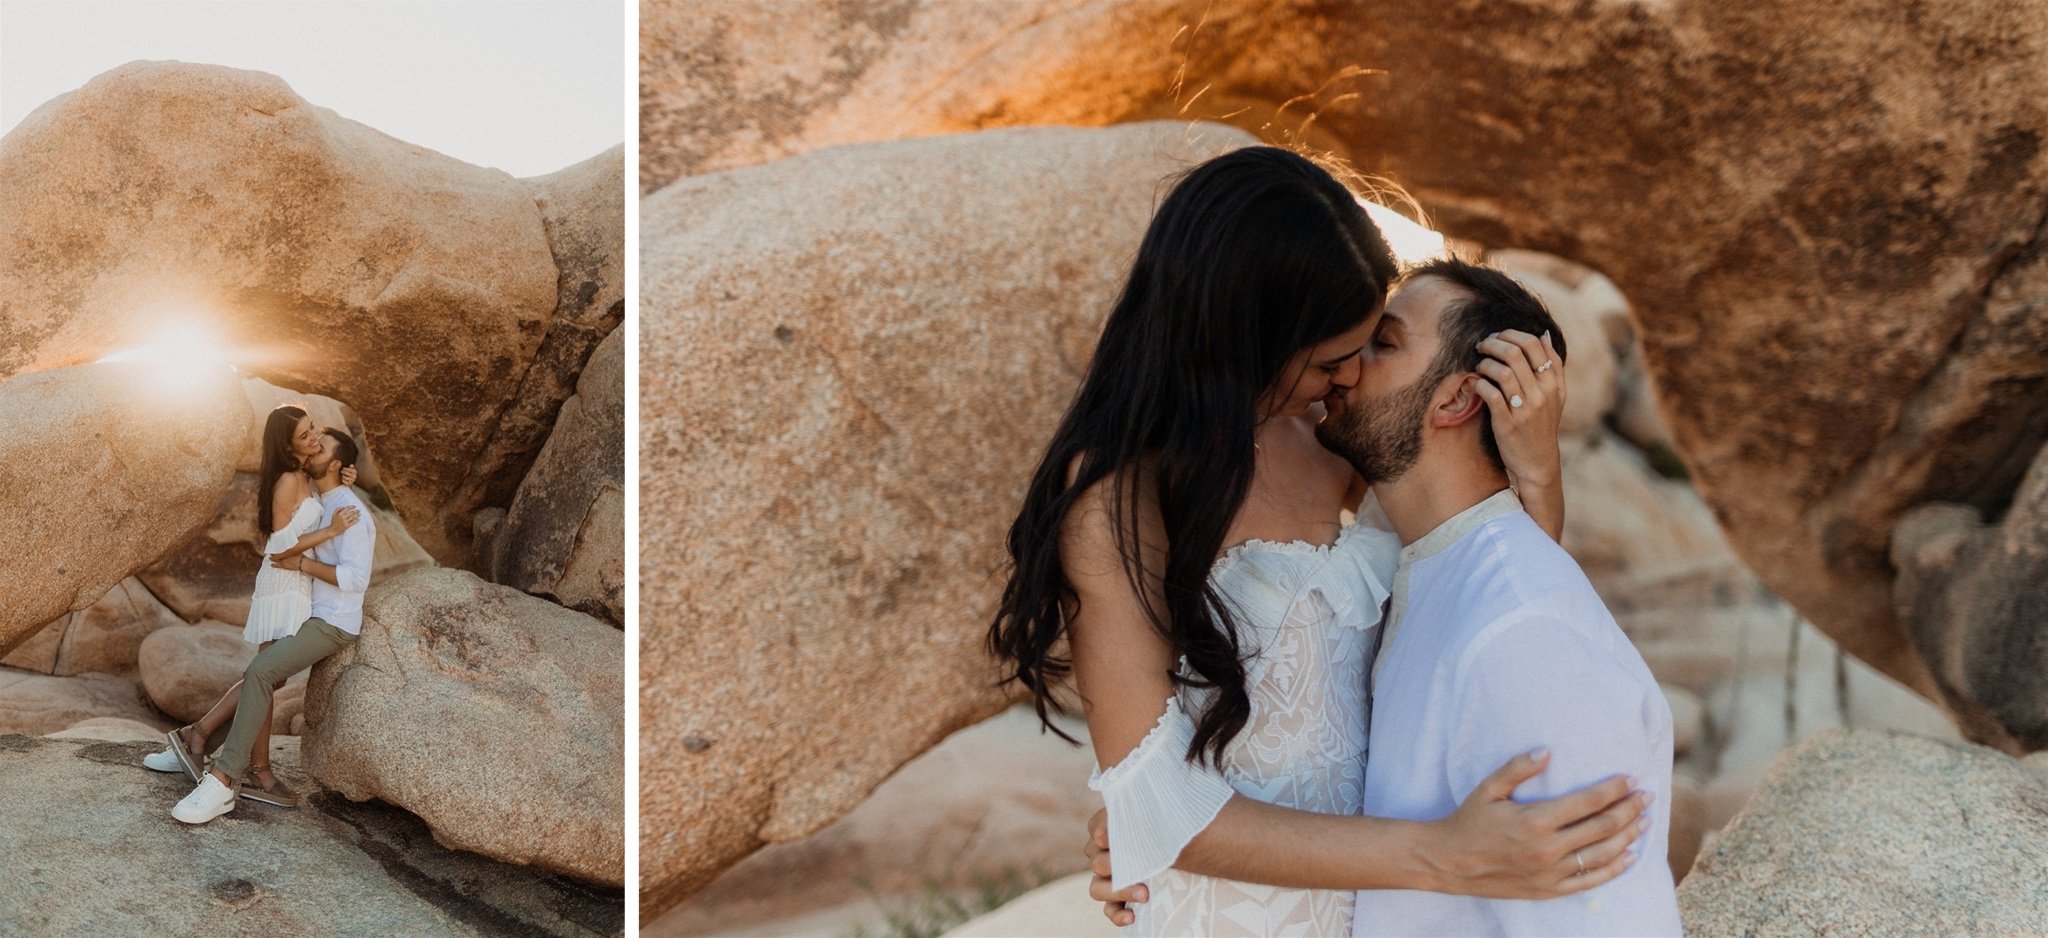 Joshua Tree Couples Session Surprise Proposal - Will Khoury Photography_35.jpg